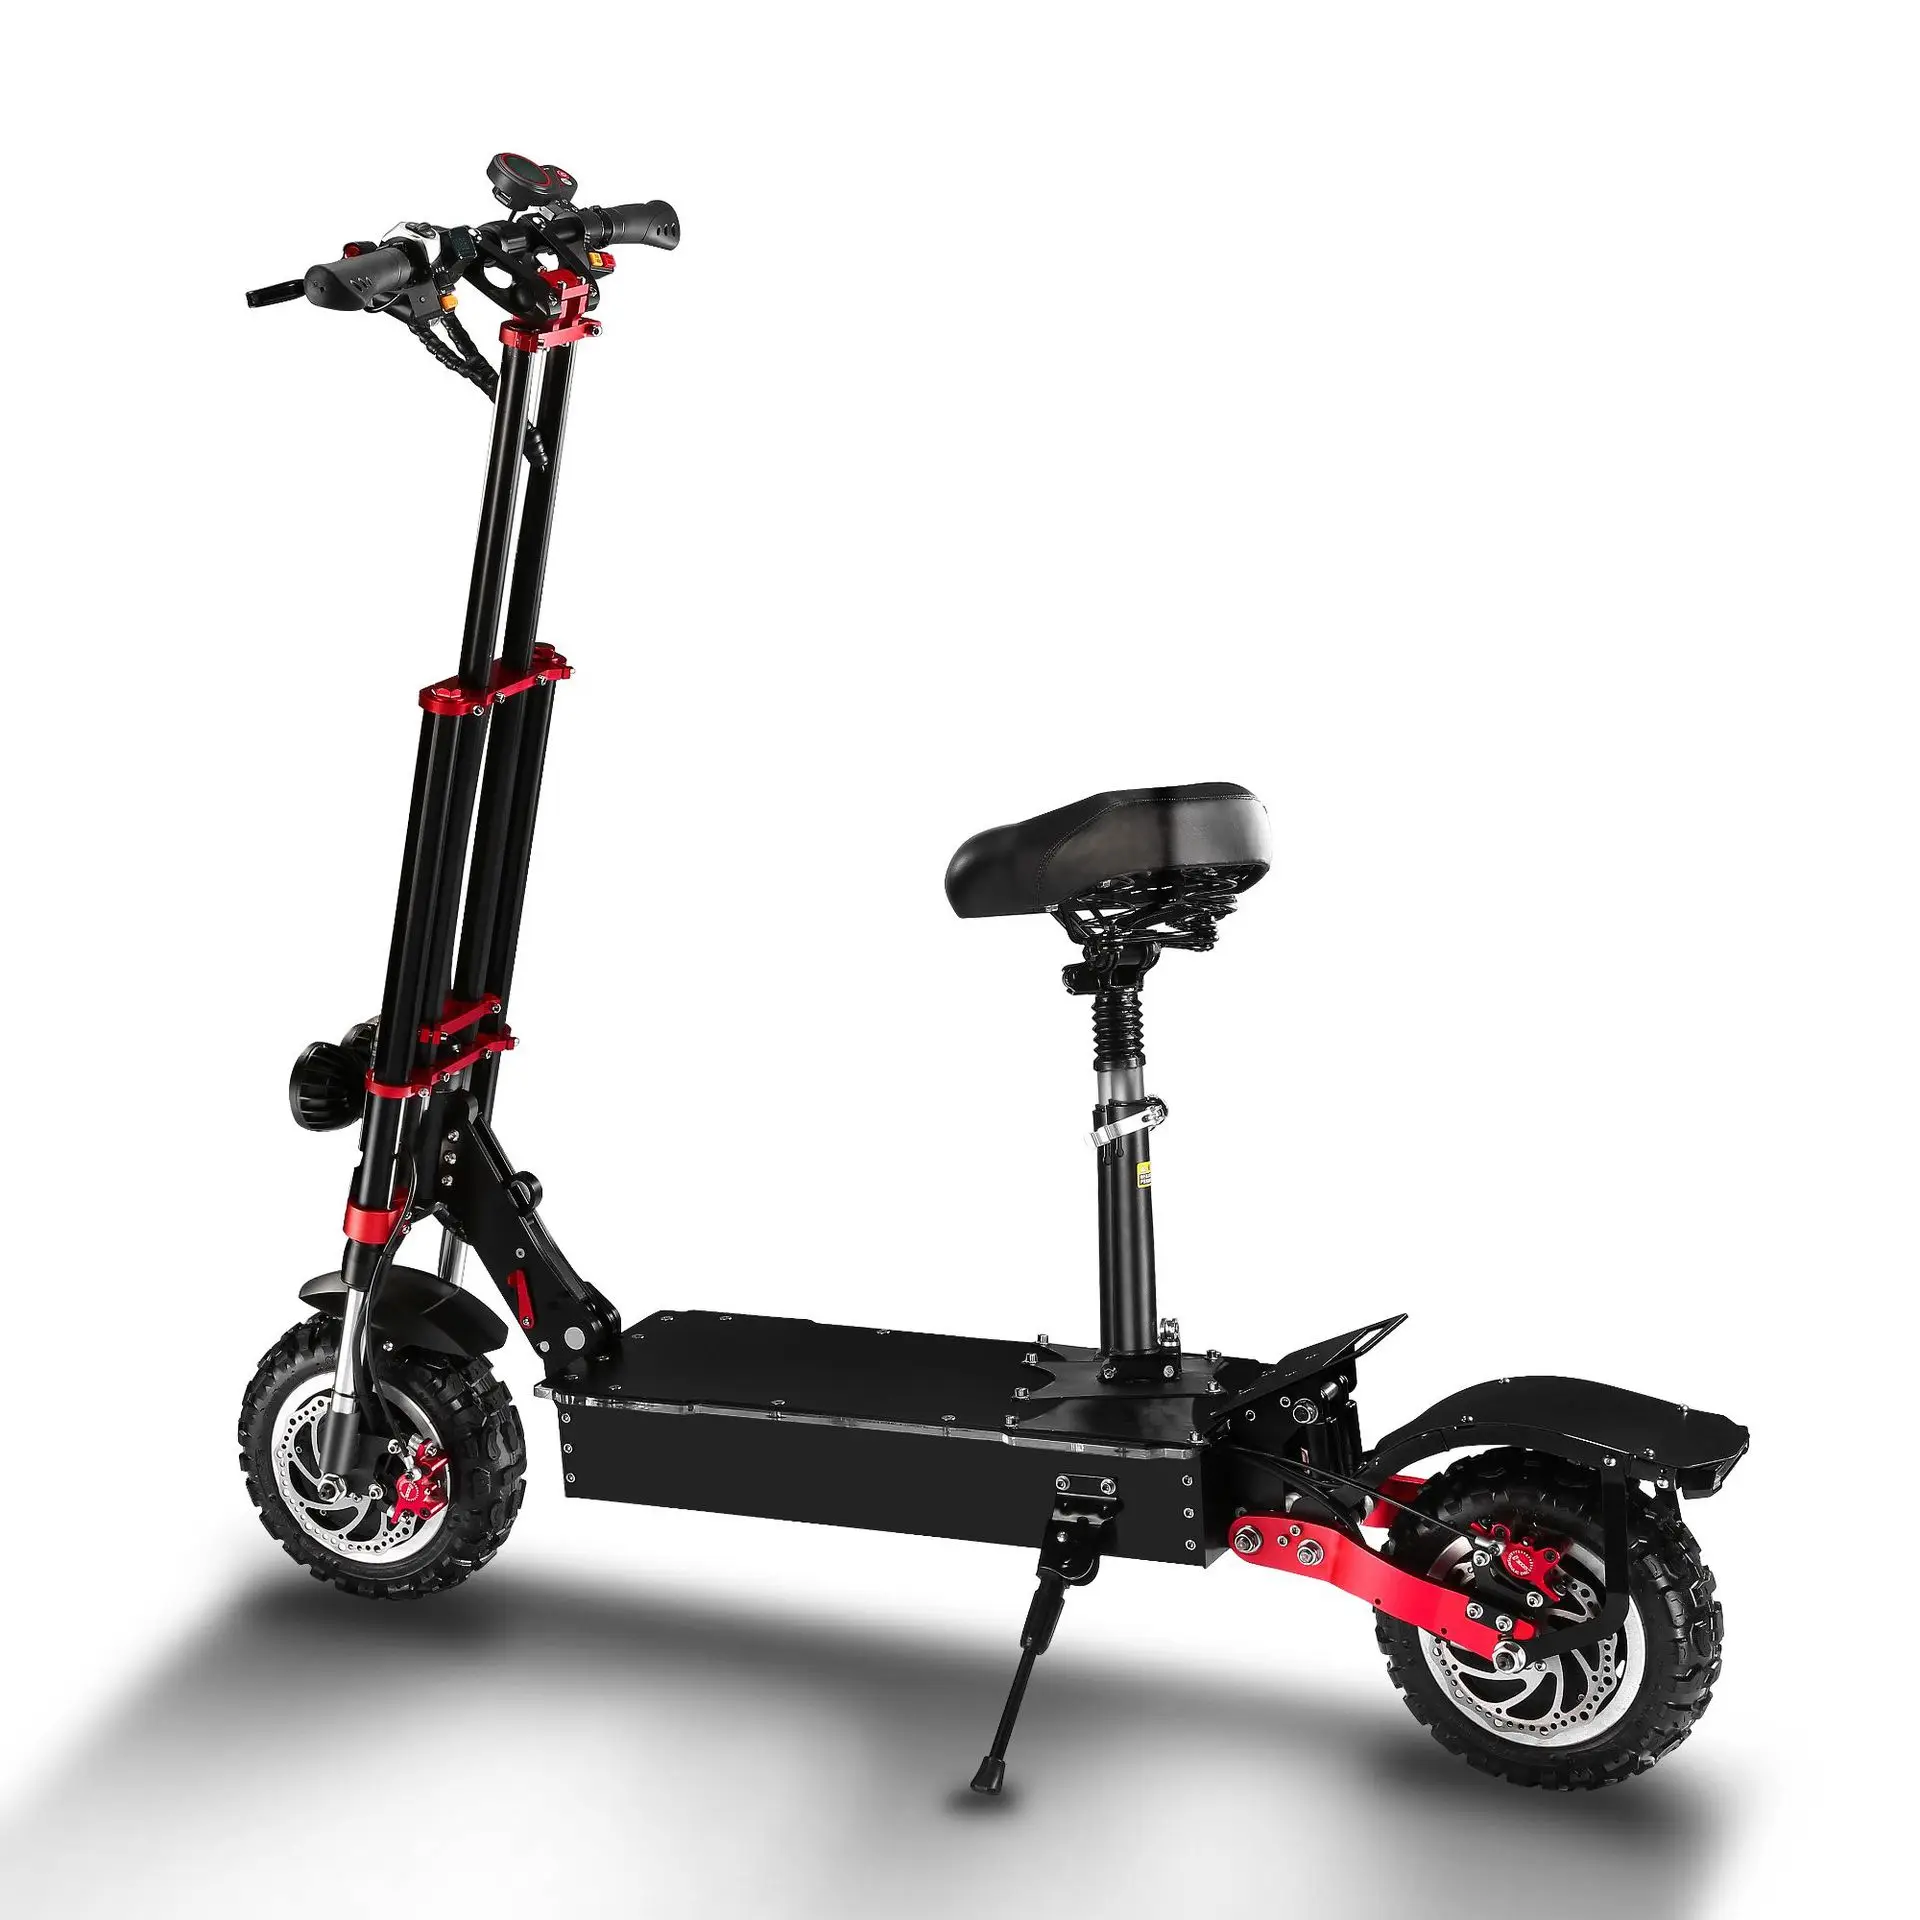 11 Inch Big Power Monopattino 70 Mph Dual Motor 60v 5600w Adult Electric Scooter For Sweden Denmark Usa - Buy Adult Electric Scooter,Electric Scooter For Adult,Monopattino Elettrico Product on Alibaba.com